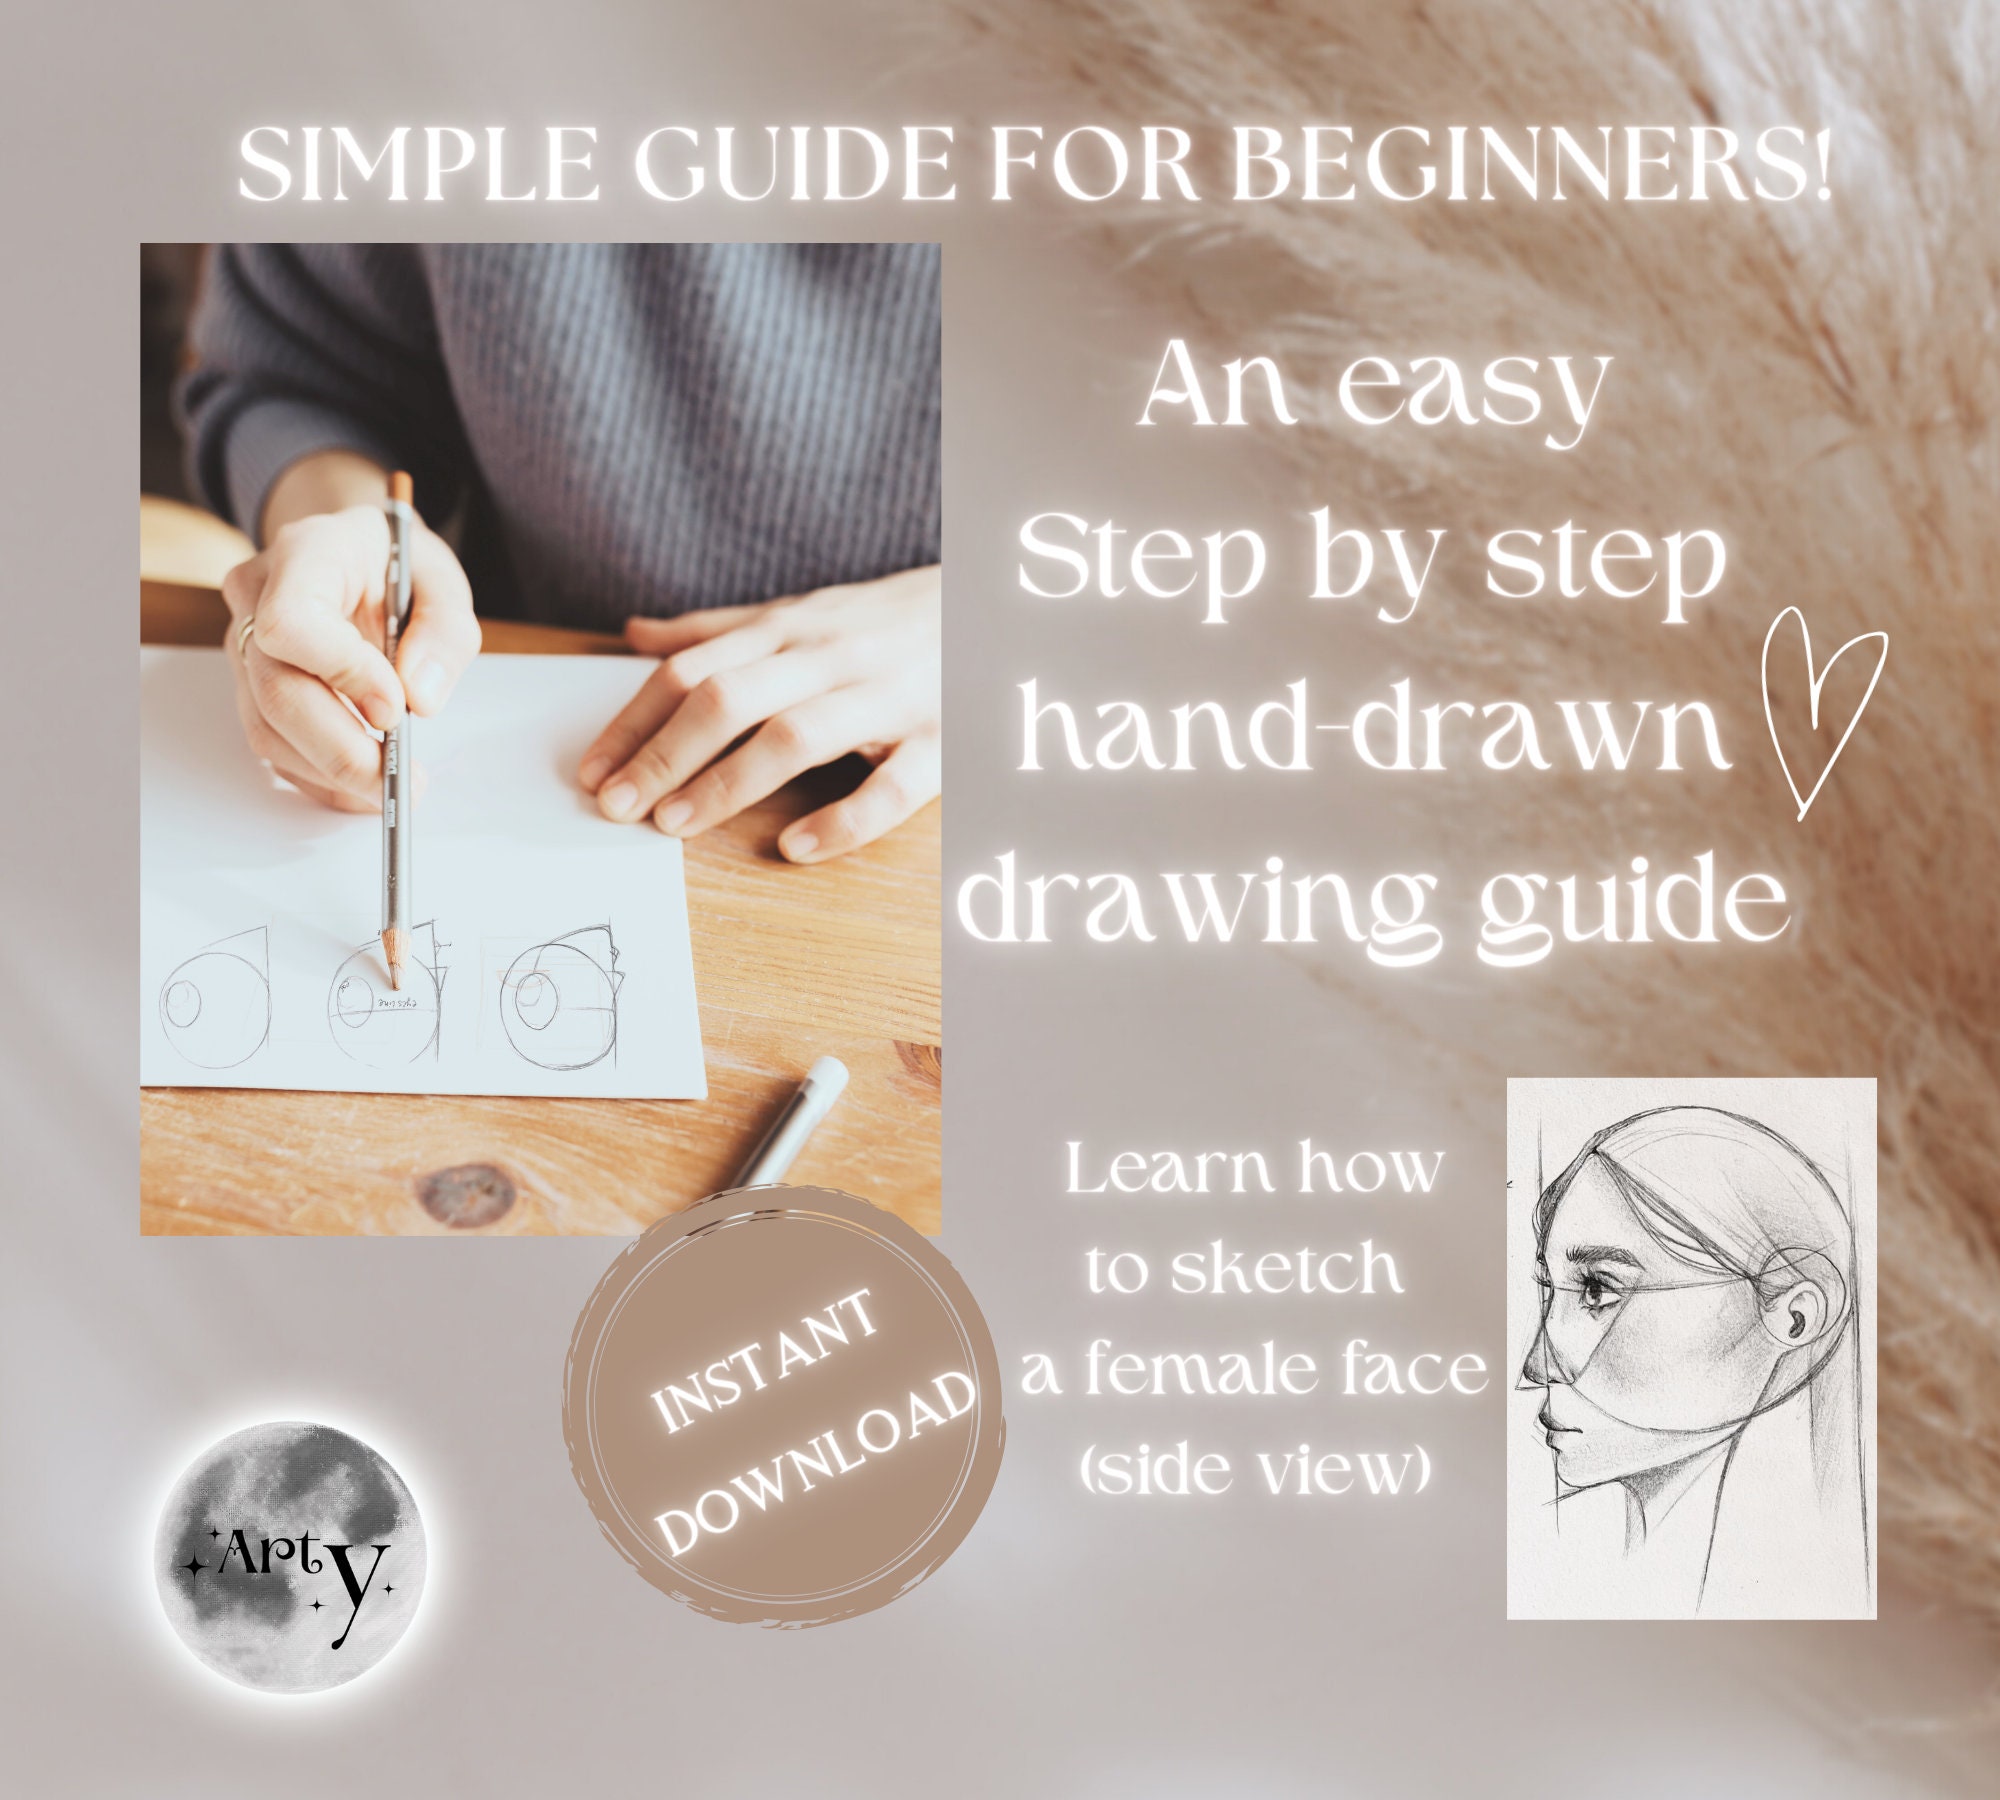 Learn to Draw Pre-outlined Pencil & Paper Drawing Kit W/ Tutorial Easy at  Home Craft Art Activity Project for Boy or Girl 8x10 